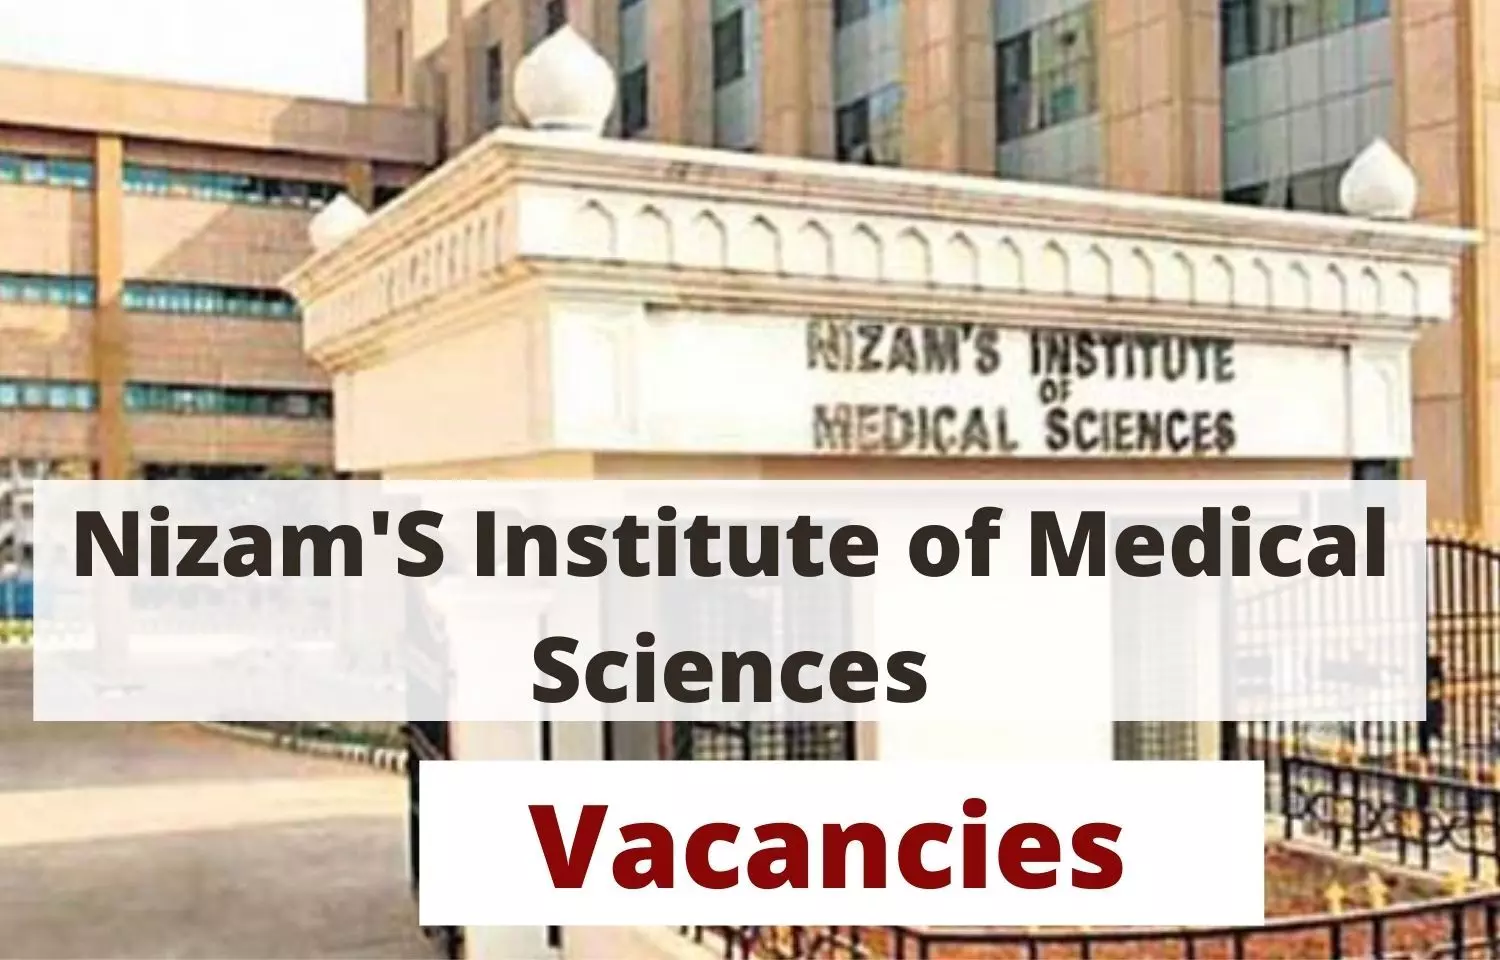 Apply now At Nizams Institute of Medical Sciences Hyderabad for SR post vacancies, Details